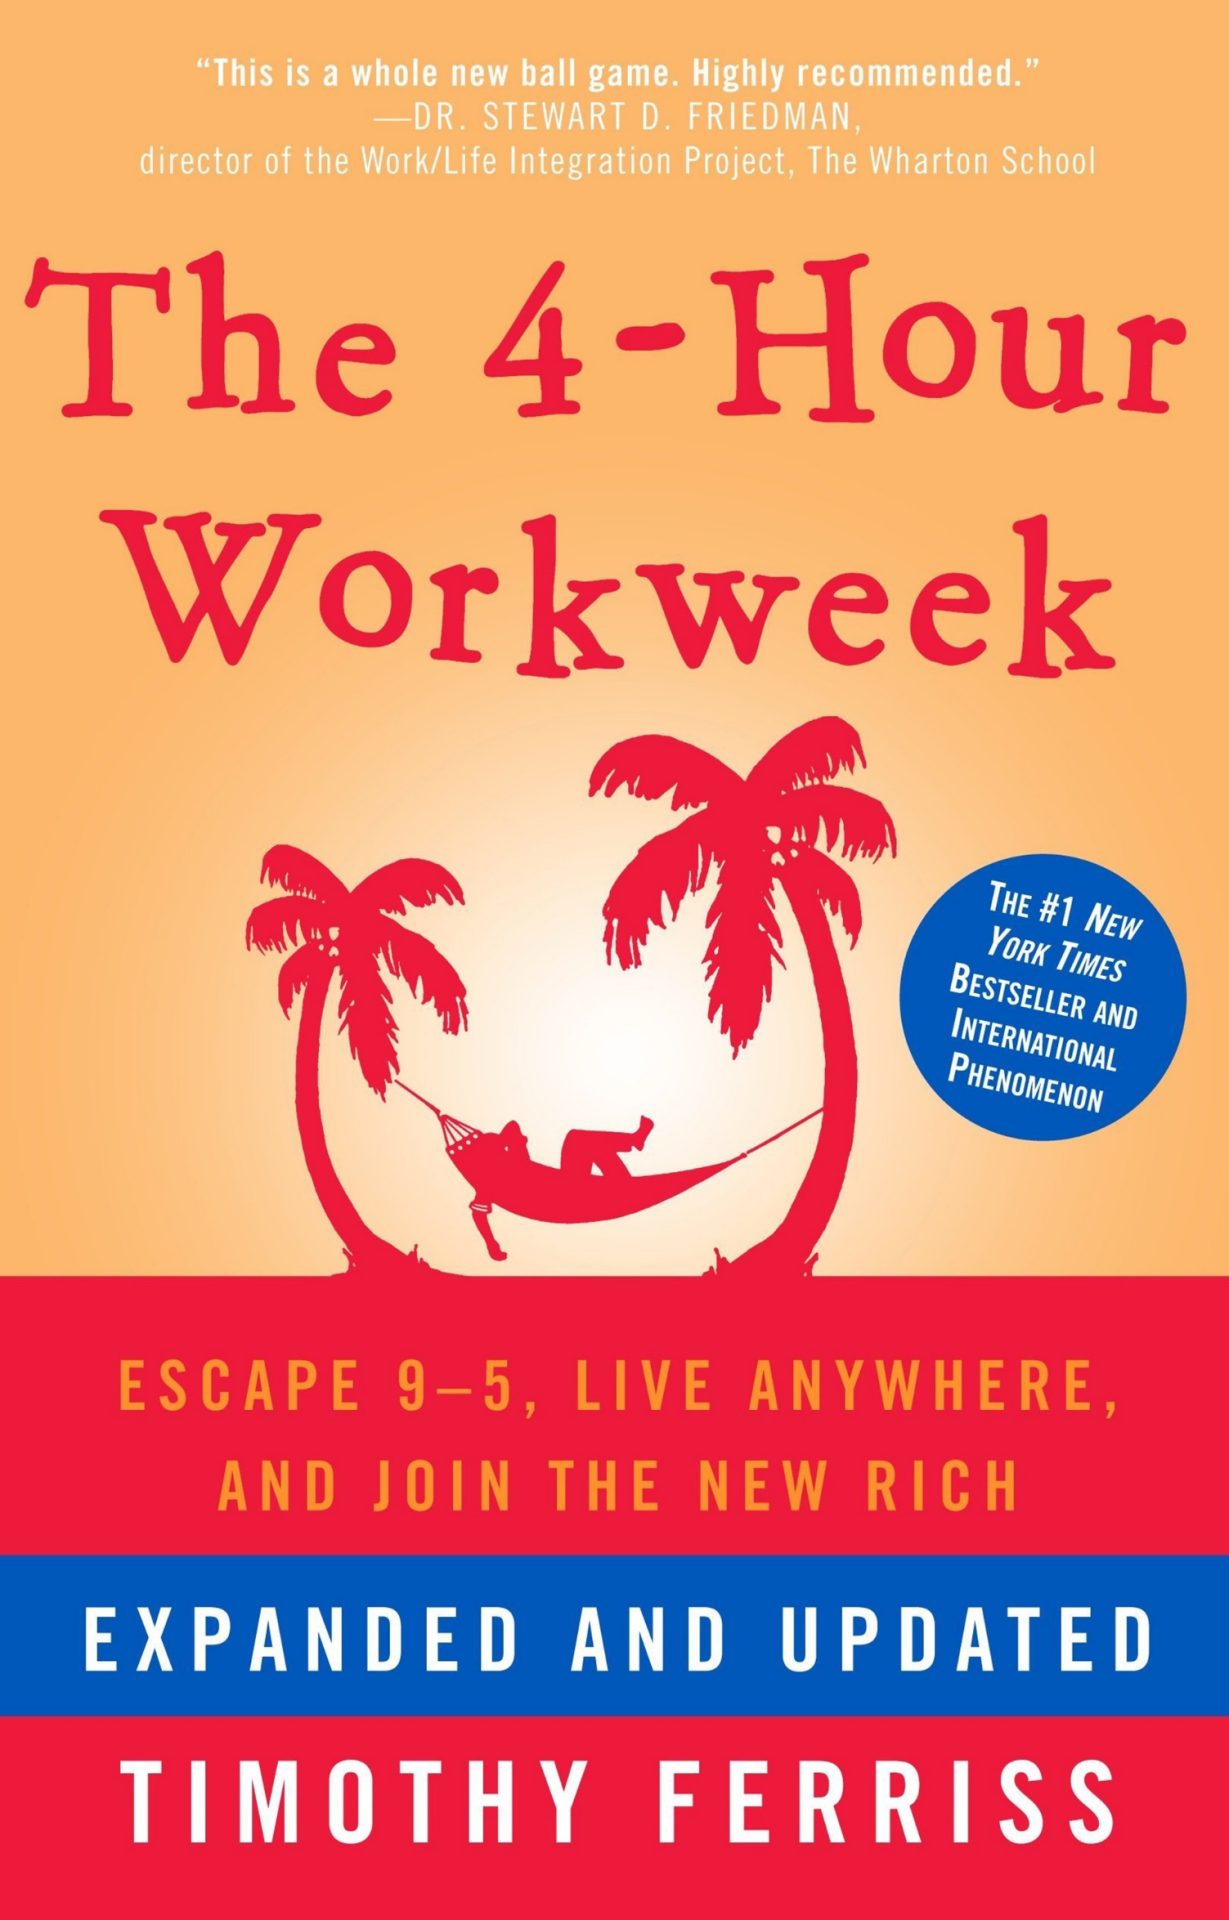 The cover of the book The 4-Hour Work Week - Tim Freeze